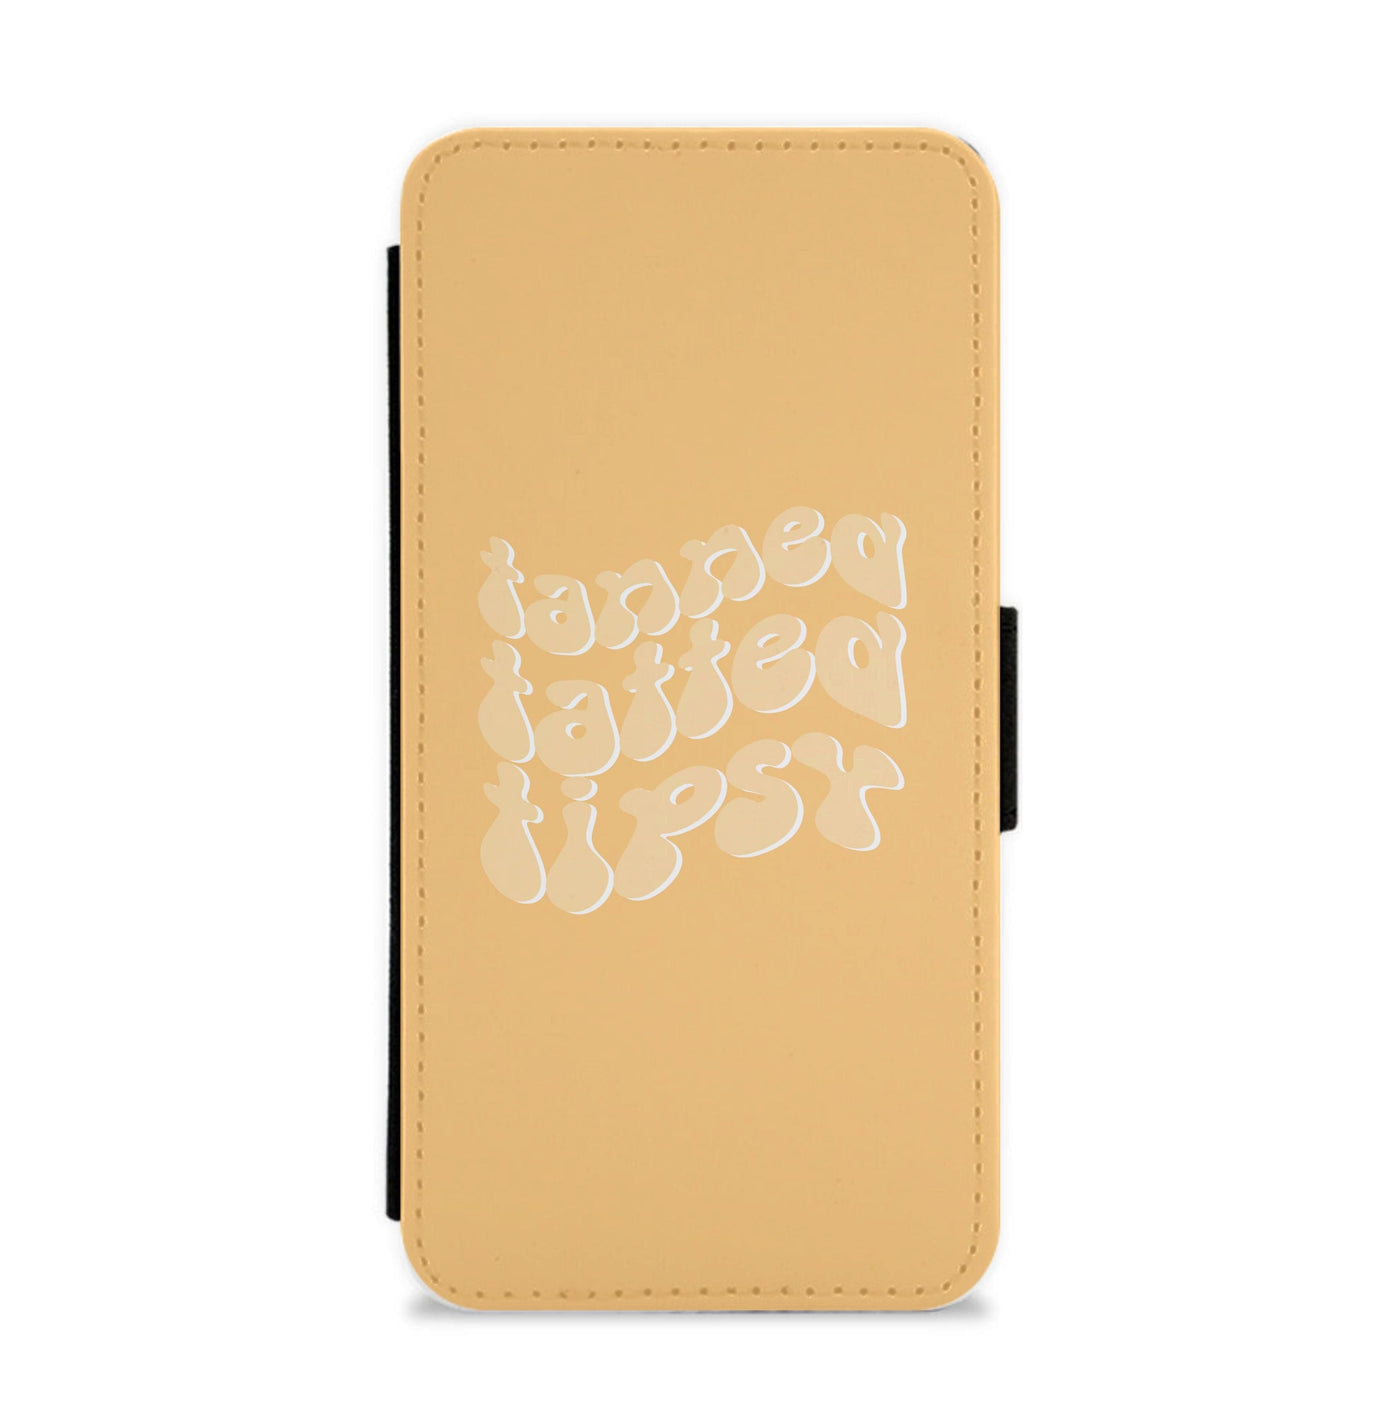 Tanned Tatted Tipsy - Summer Quotes Flip / Wallet Phone Case